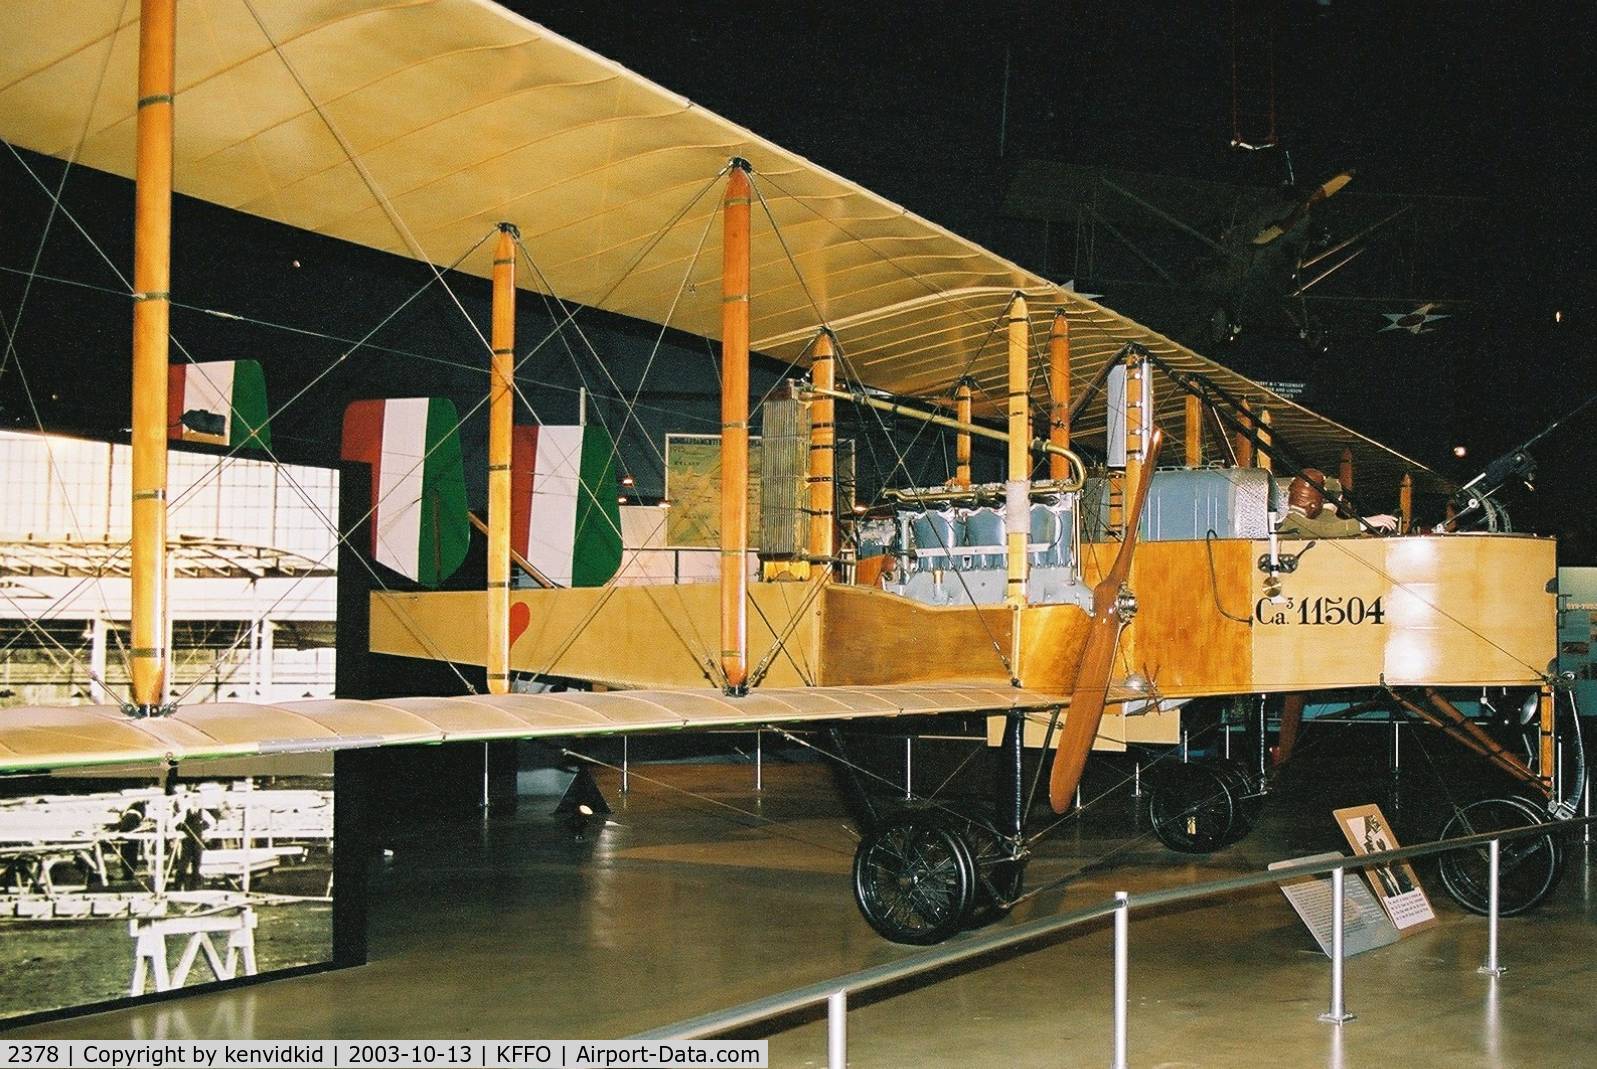 2378, 1916 Caproni Ca-36 C/N Ca.3-11504, At The Museum of the United States Air Force Dayton Ohio.